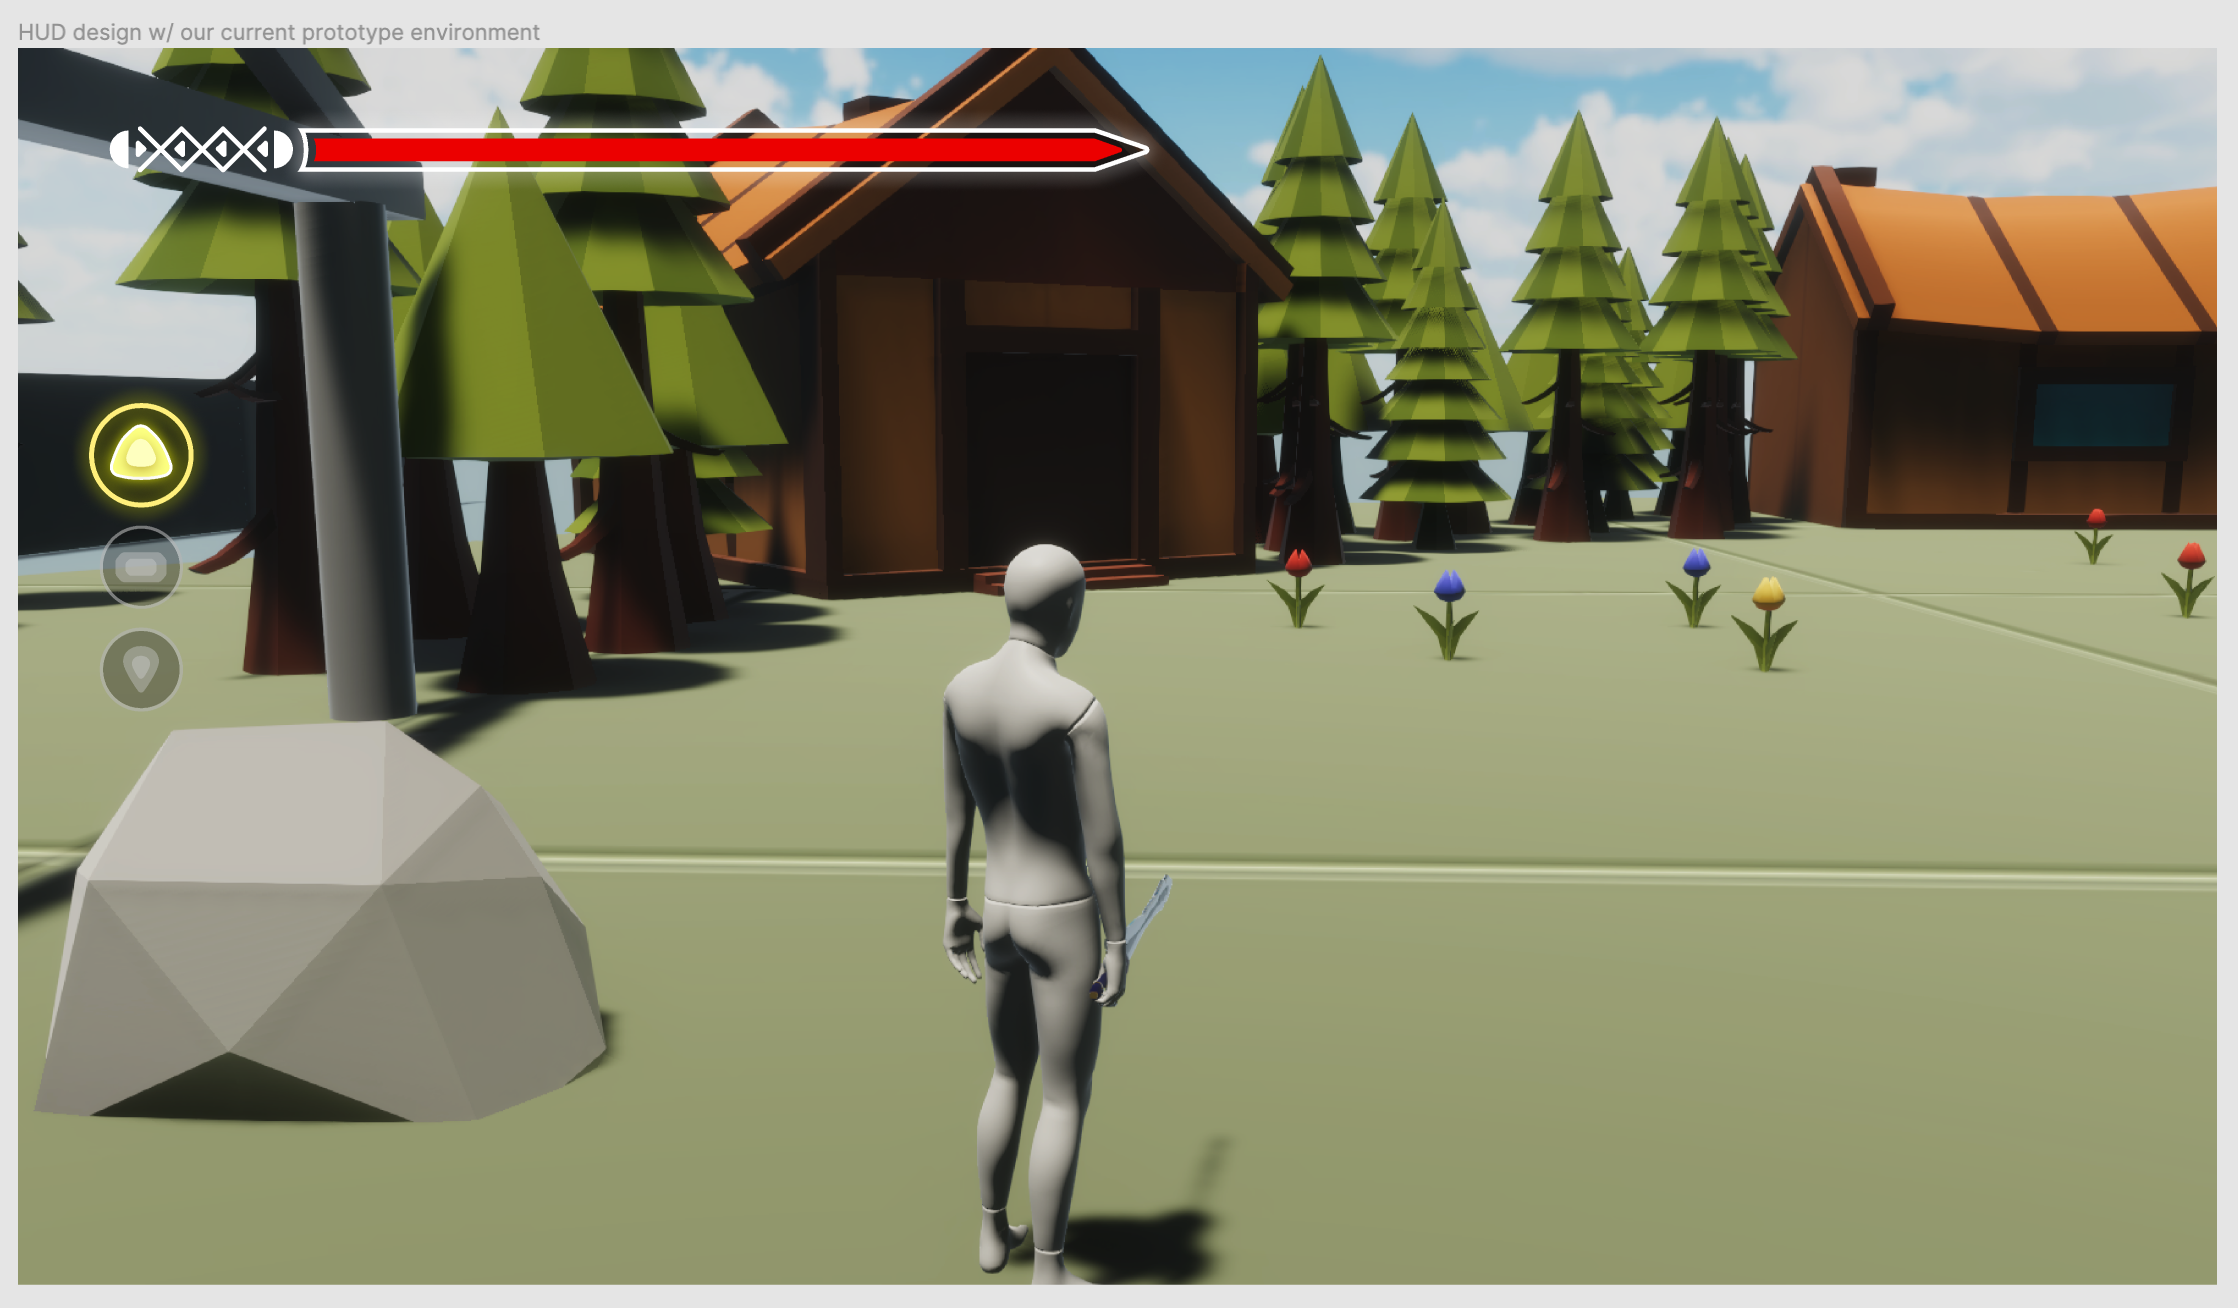 Initial HUD Design with Current Playtest Environment